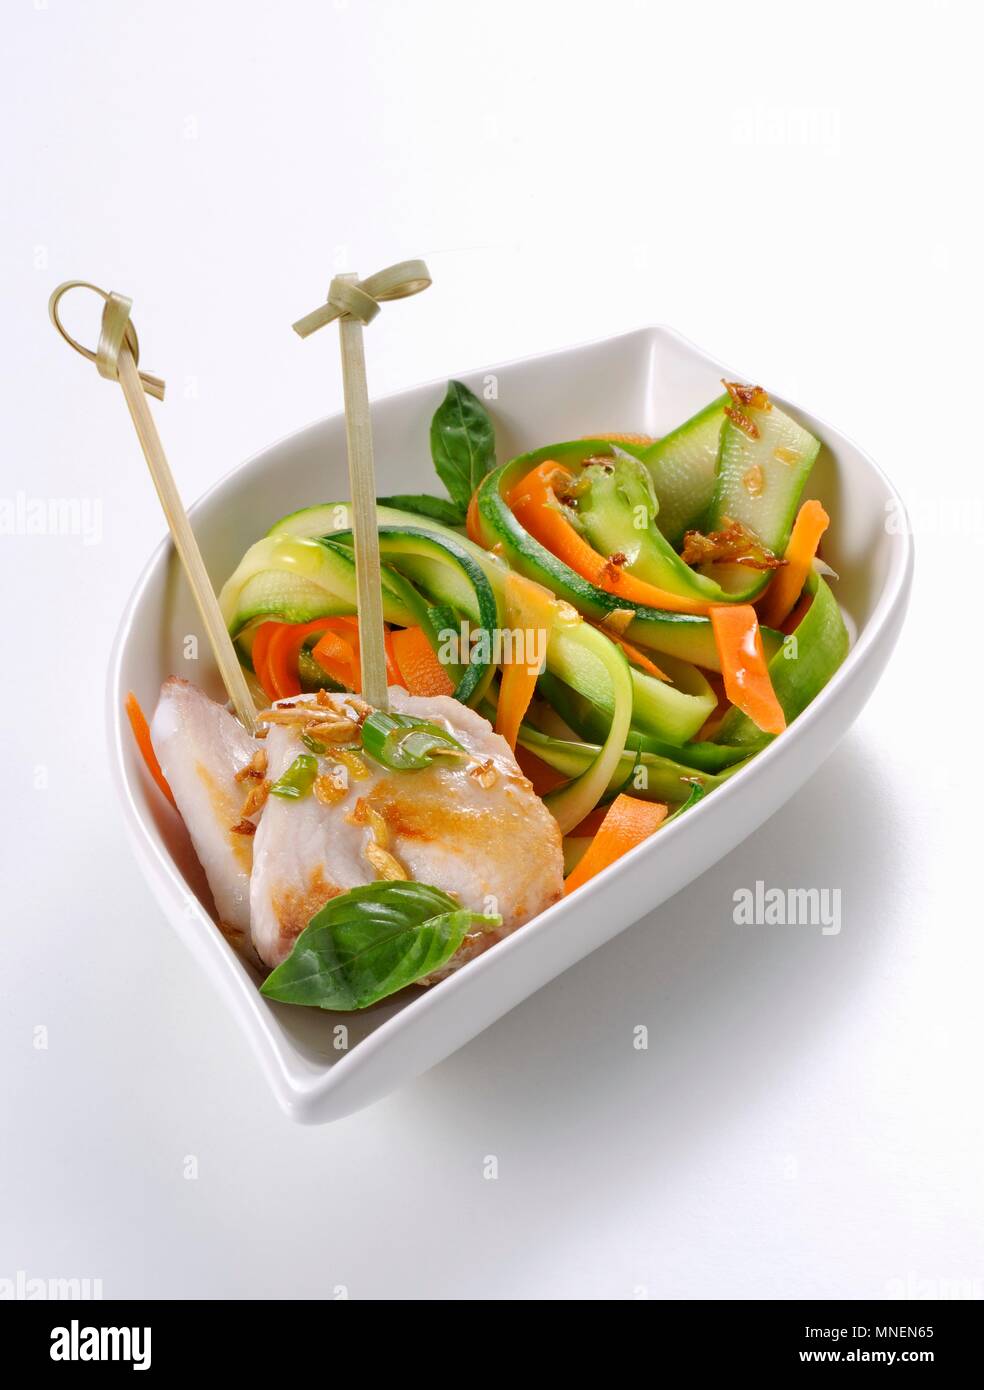 Fish with Thai-style vegetables Stock Photo